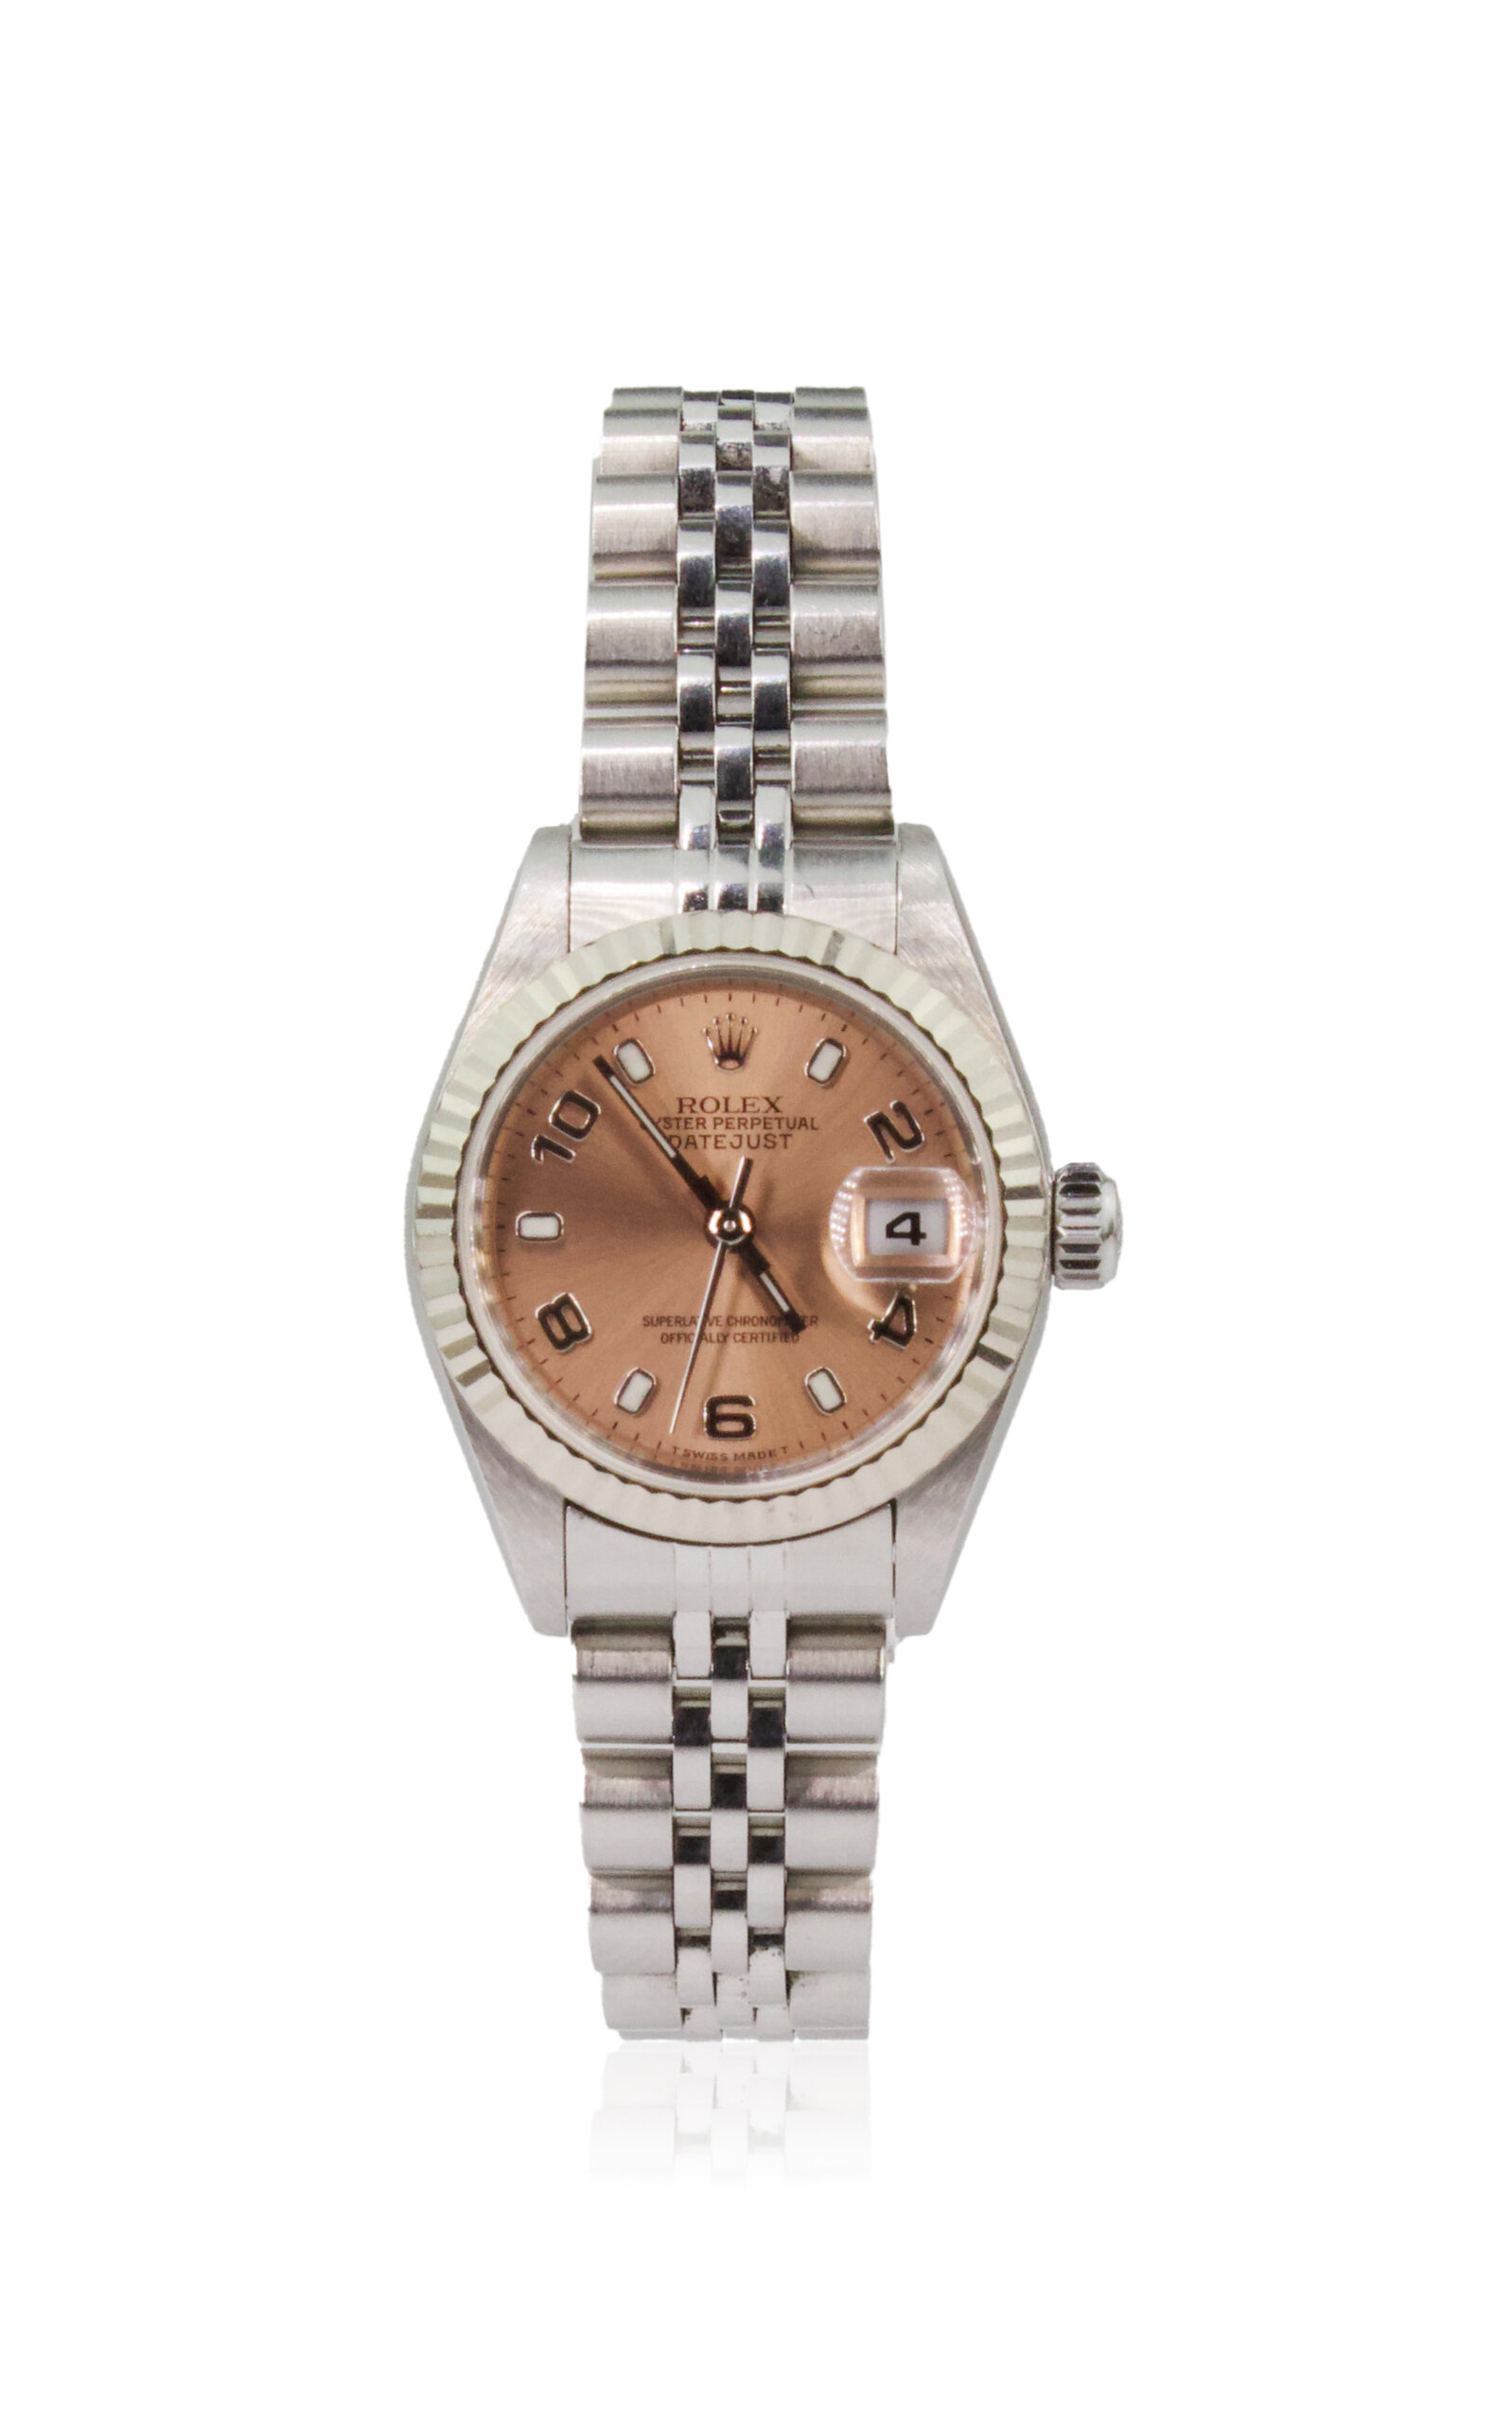 Private Label London Vintage Rolex Datejust Stainless Steel; 18k White Gold Watch In Pink